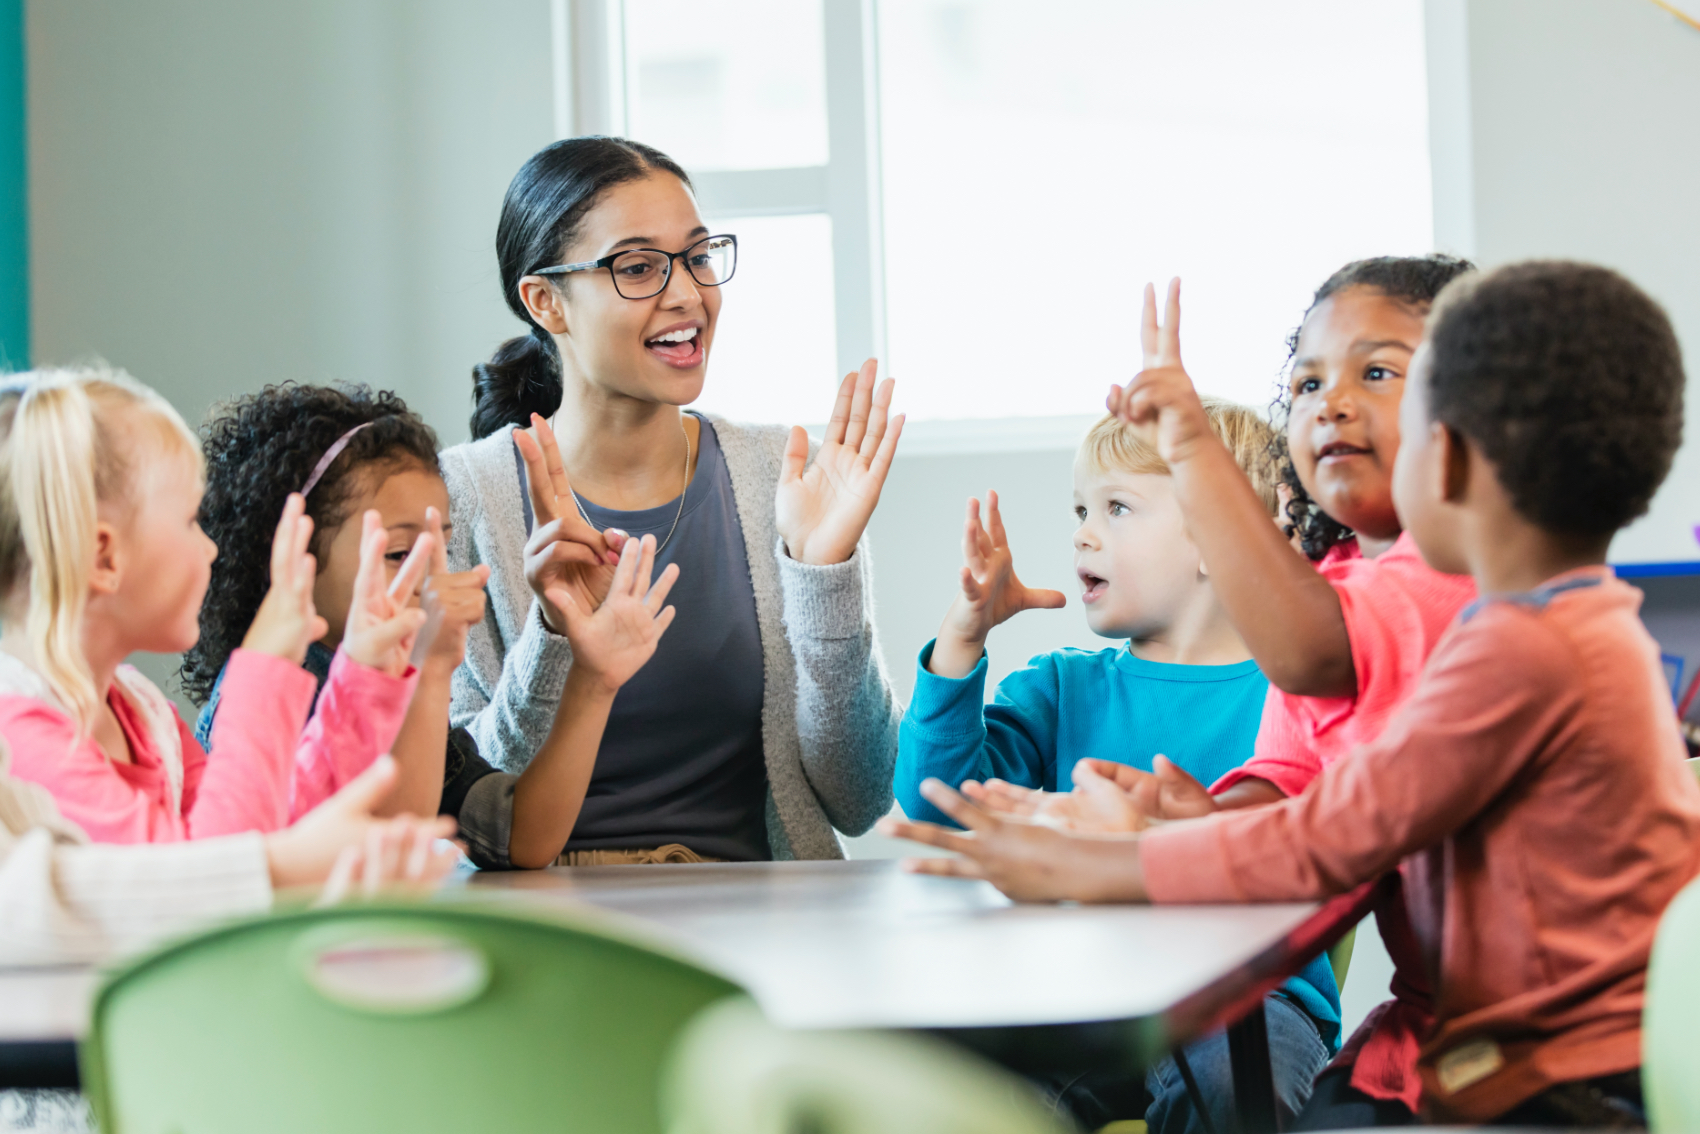 5 Lessons From a Preschool Teacher to Succeed at Work